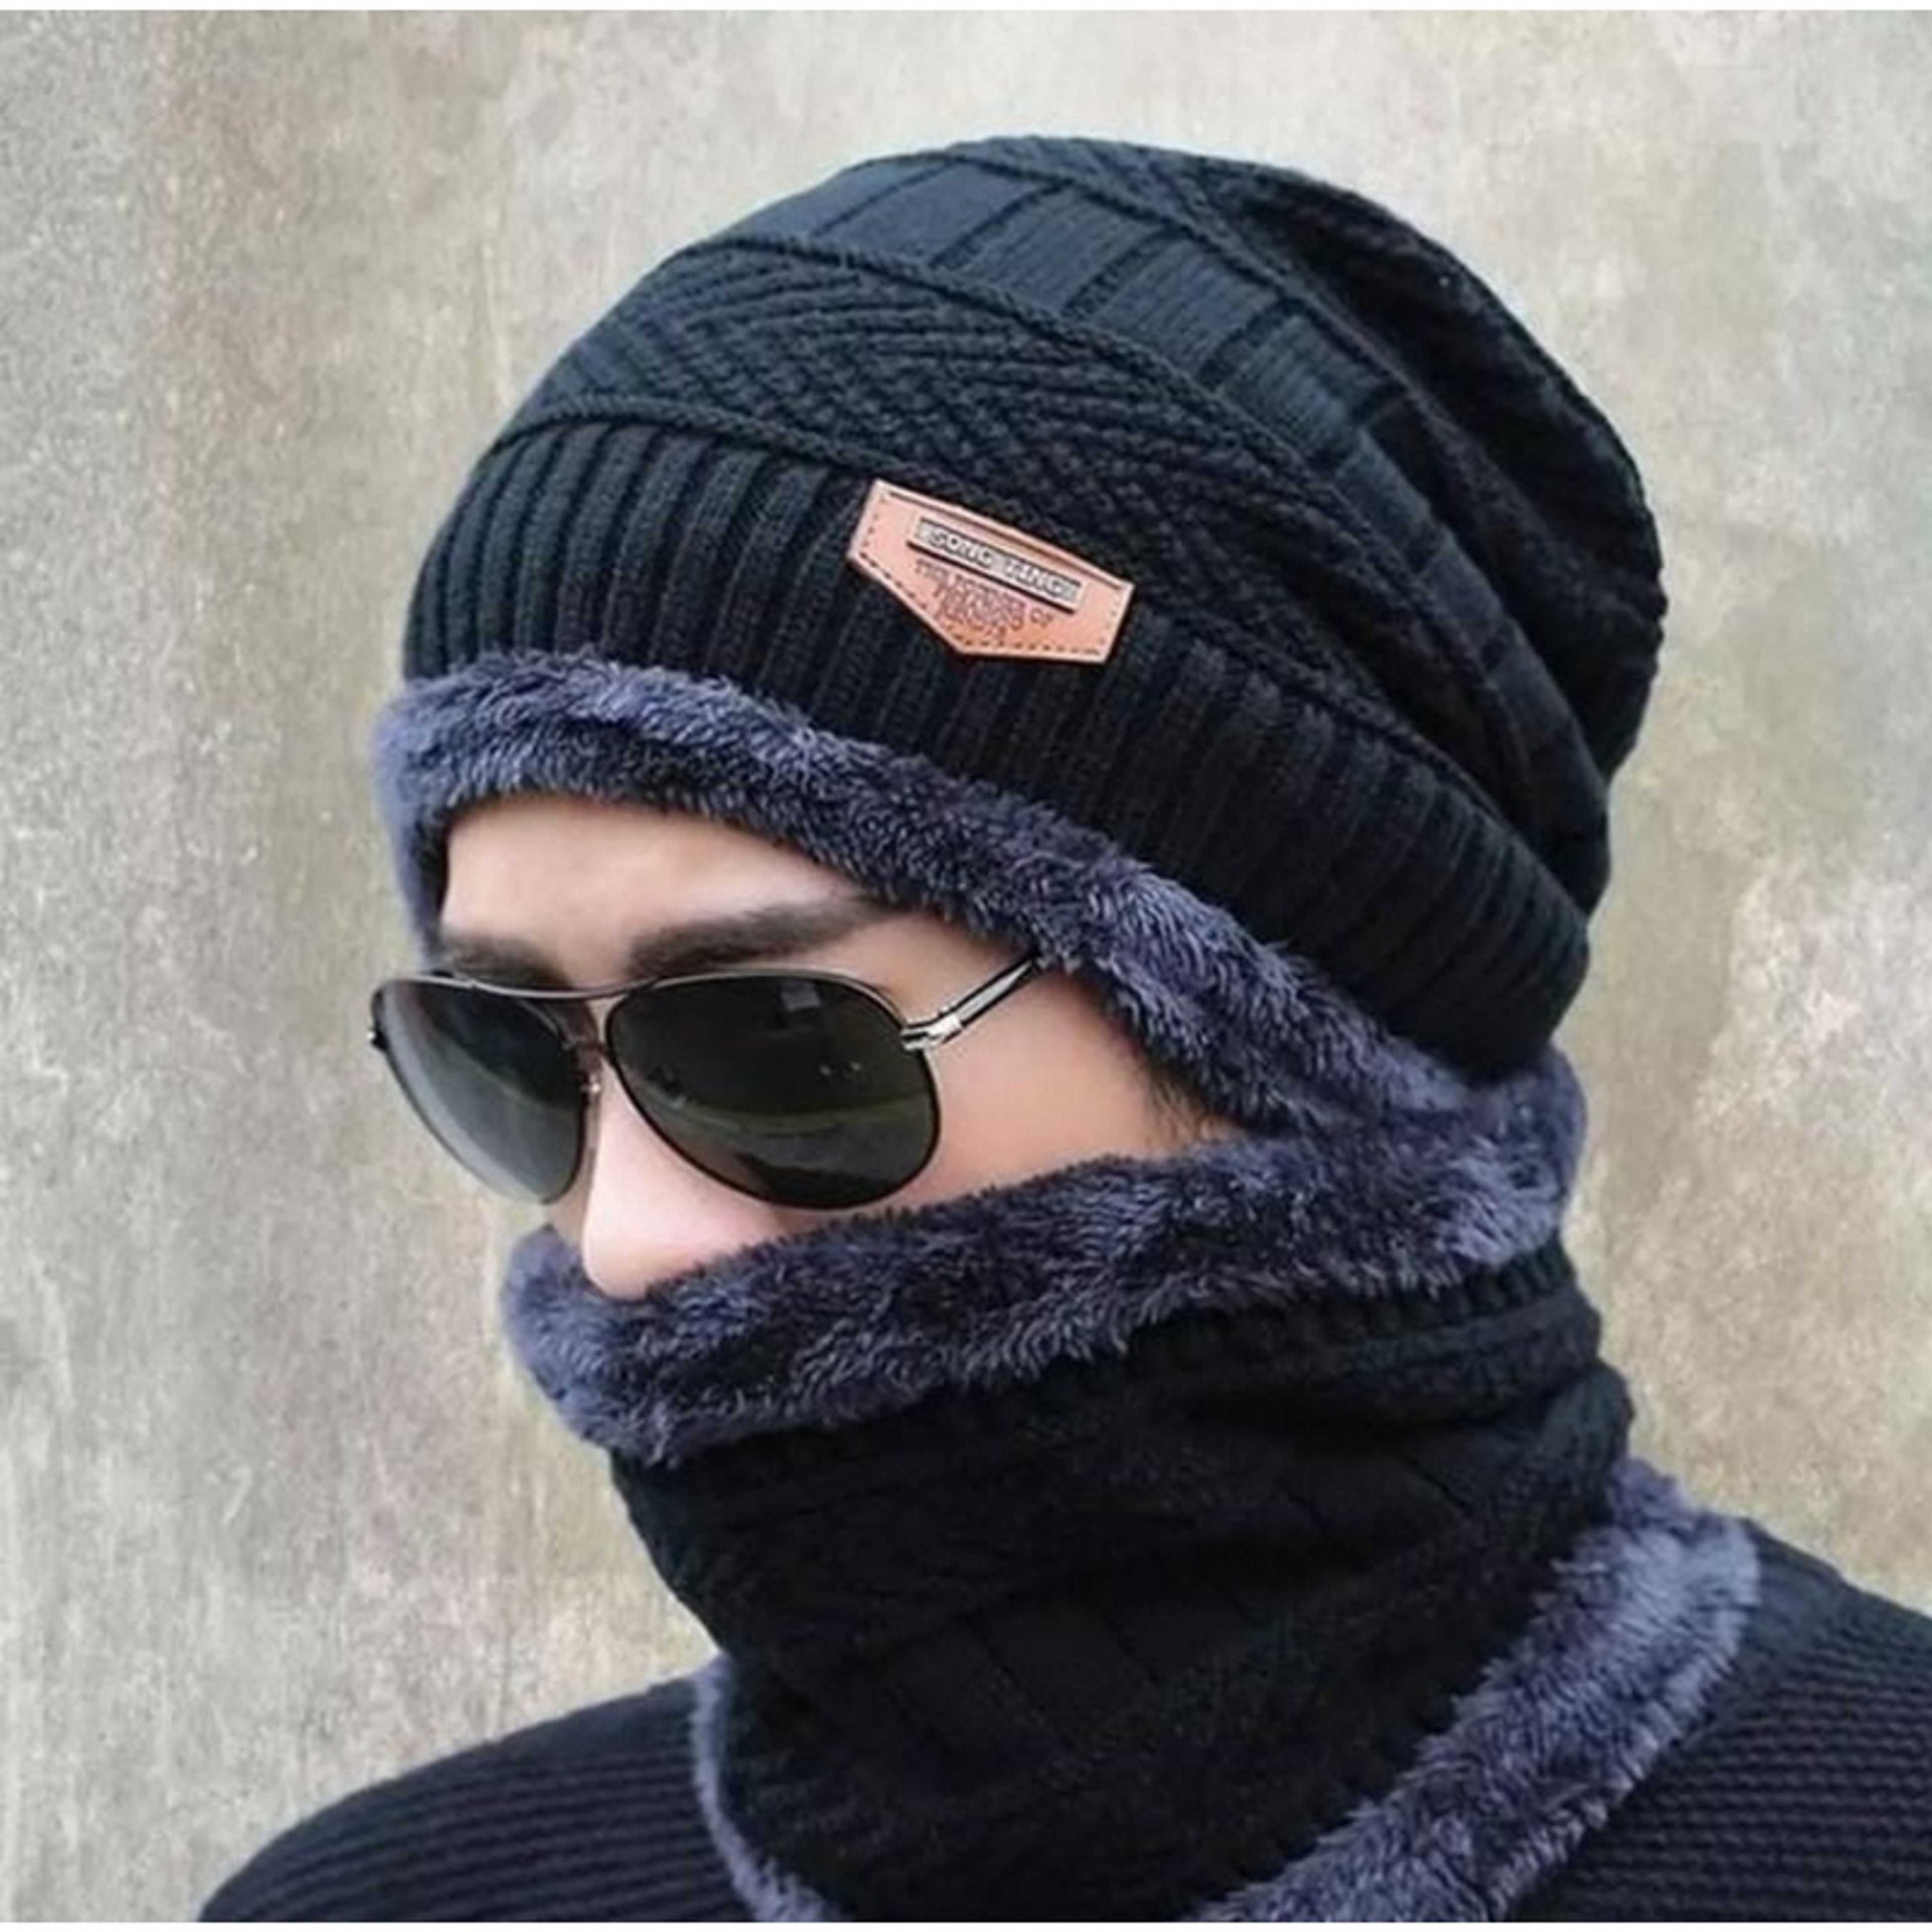 Winter Cap and neck for men - women , HIGH QUALITY 2 PCS Winter Beanie Hat Cap Neck Warmer Scarf Set Fleece Lined Skull Cap and Scarf Set Stylish Knit Skull Cap for Men Women Best Price